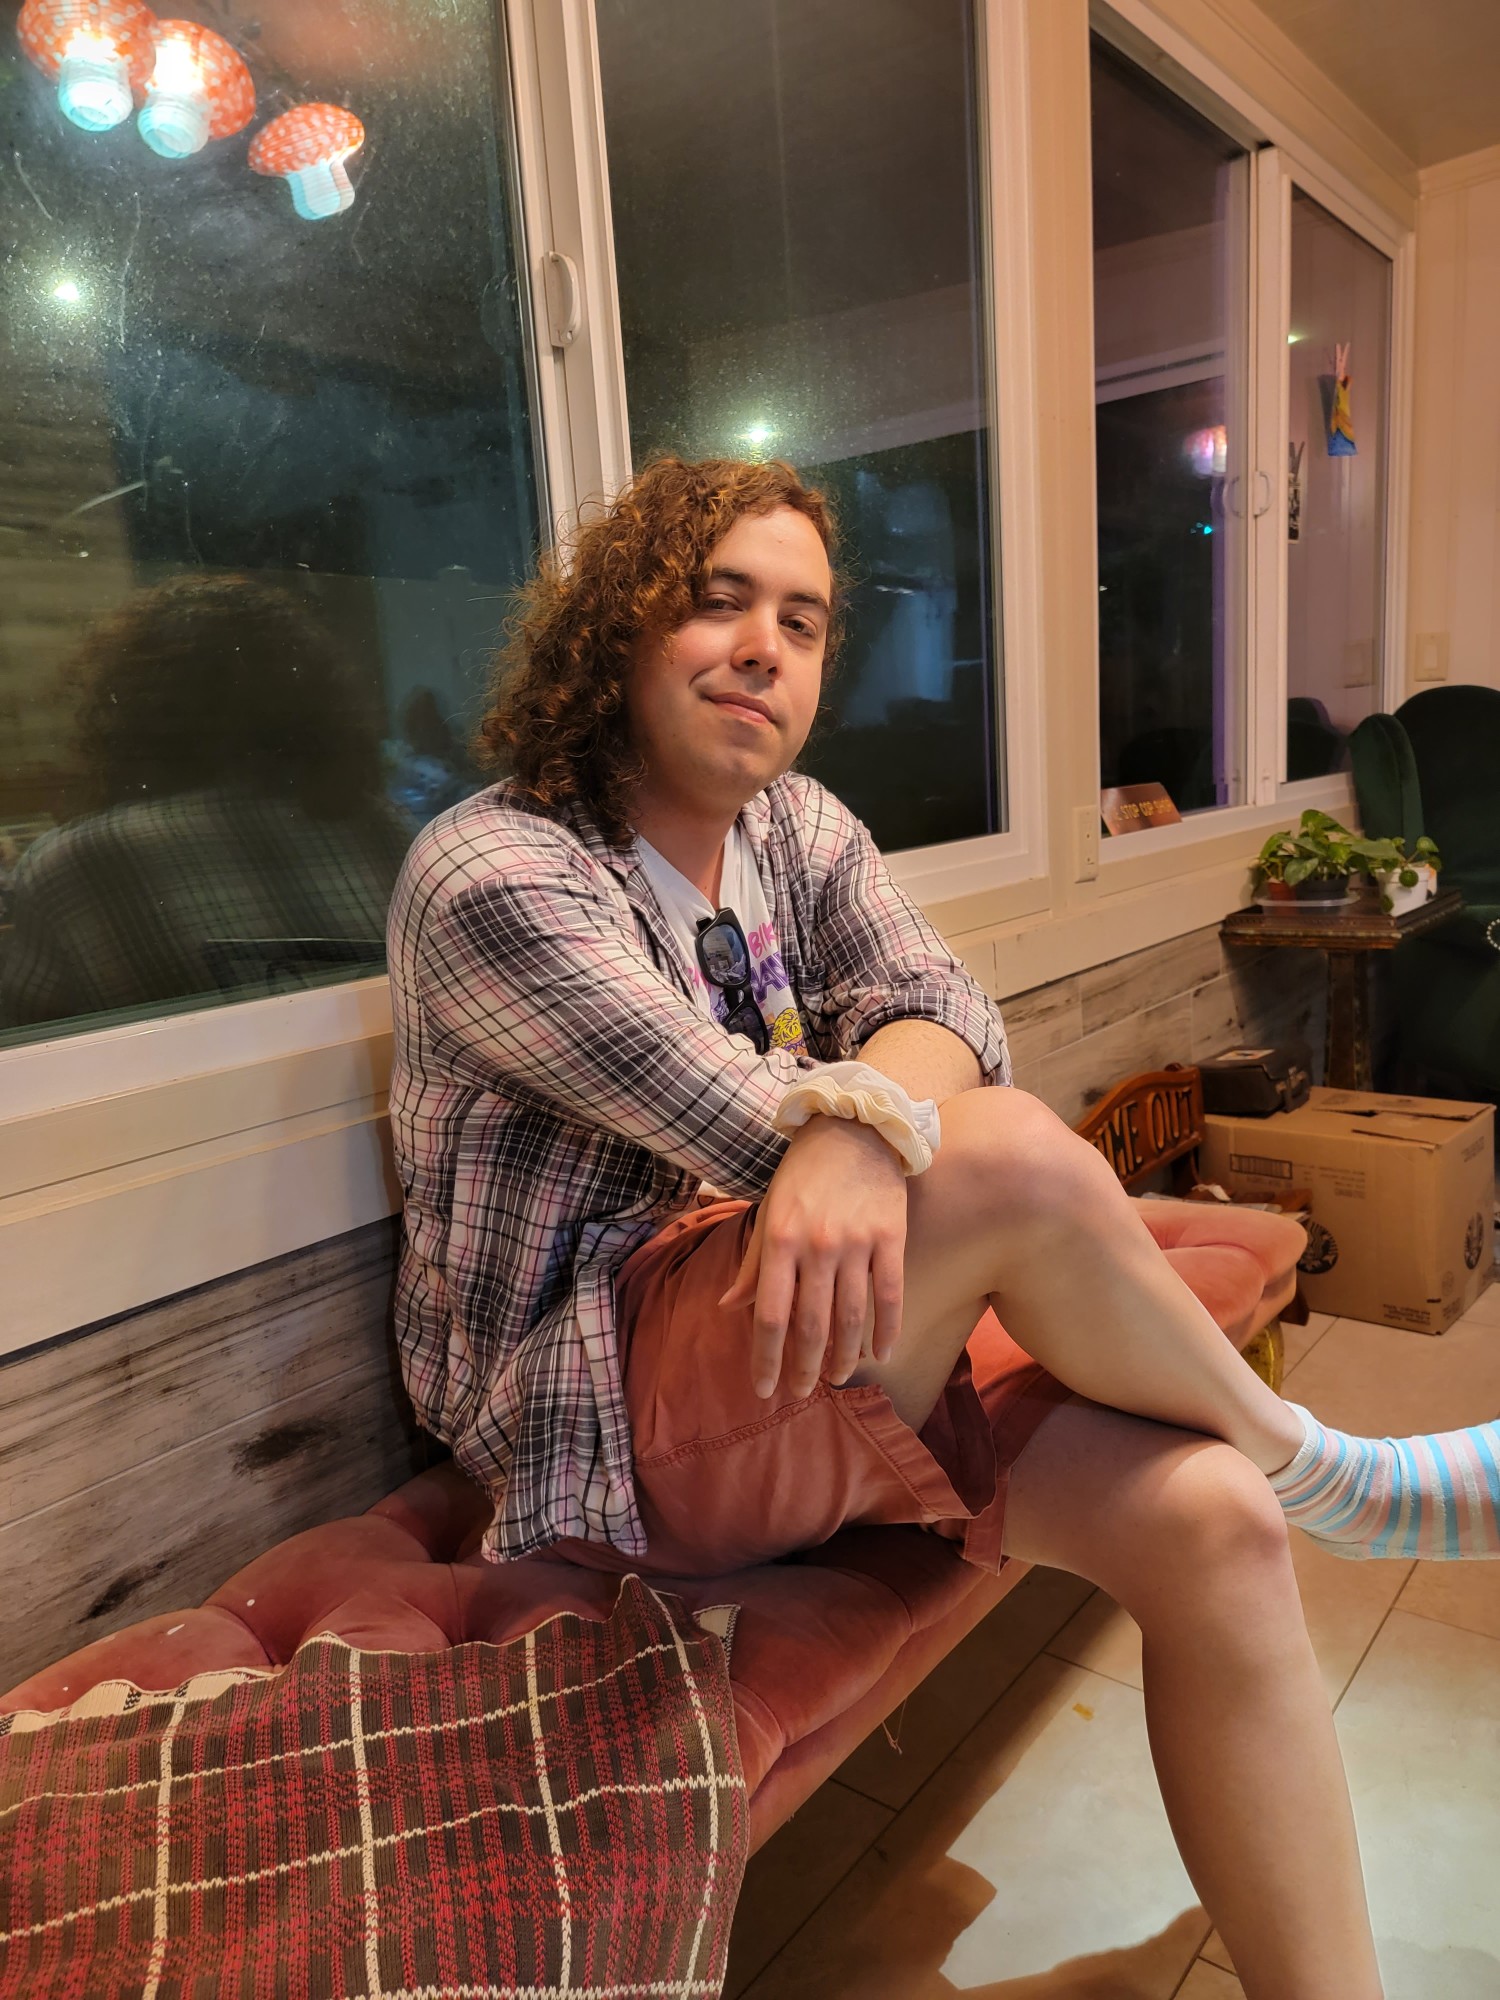 Kass is shown seated cross-legged on a cushioned bench with windows behind her, facing the camera at a three-quarter angle. She is wearing orange shorts, a grey plaid button down, unbuttoned with a white t shirt underneath it. Her brown curly hair is loose over her shoulder, with a white scrunchie on her wrist closest to the camera.